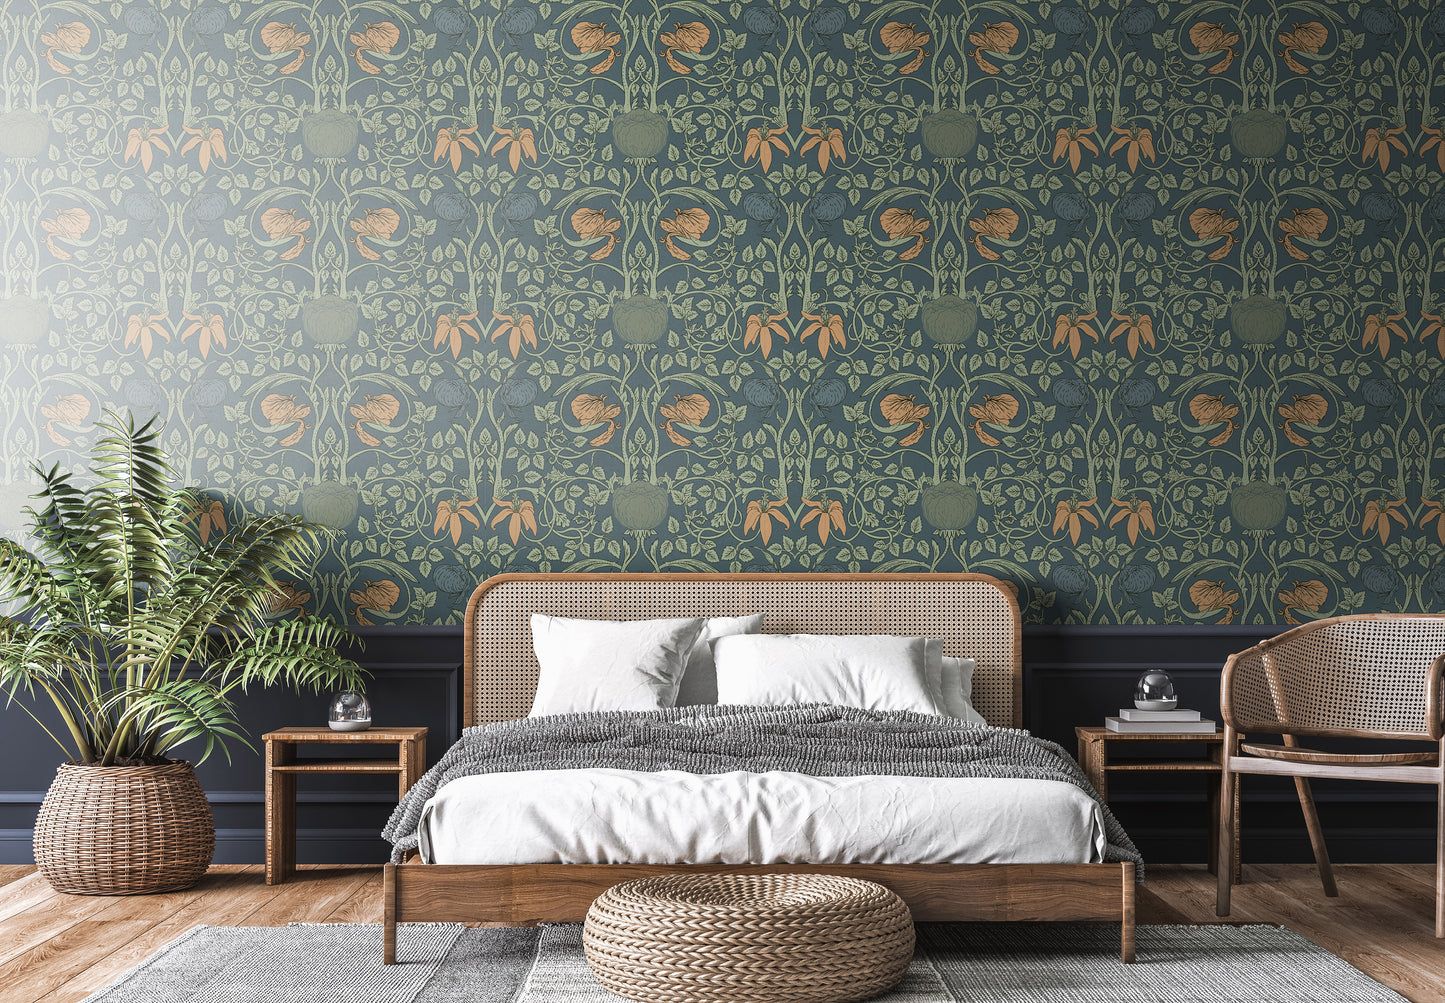 Retro Tulip Floral Removable Peel And Stick Wallpaper